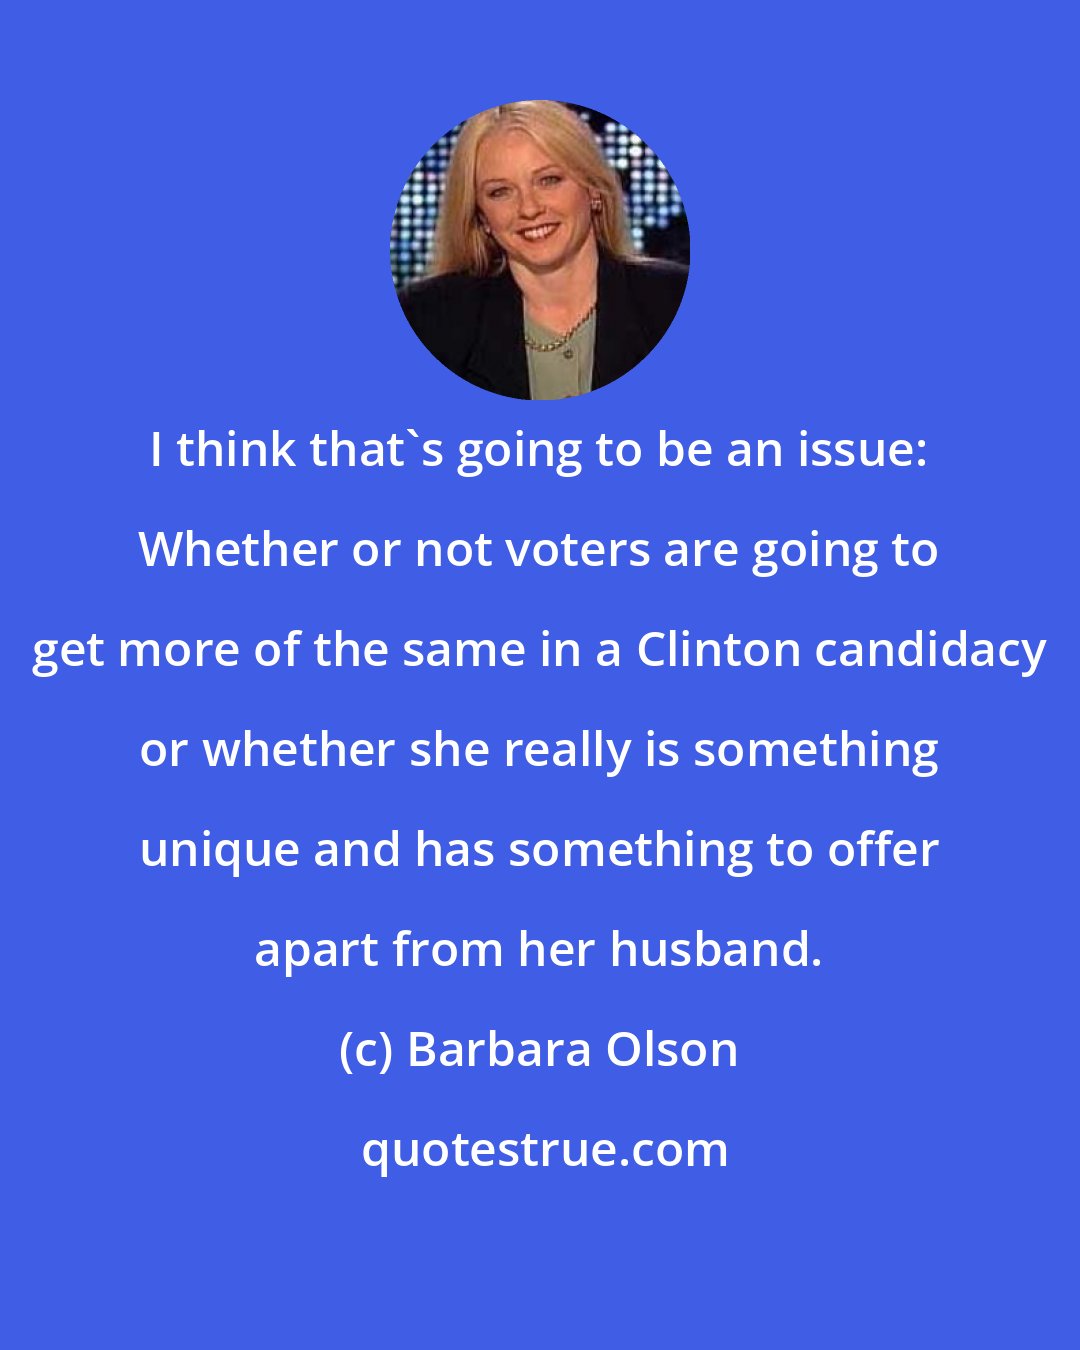 Barbara Olson: I think that's going to be an issue: Whether or not voters are going to get more of the same in a Clinton candidacy or whether she really is something unique and has something to offer apart from her husband.